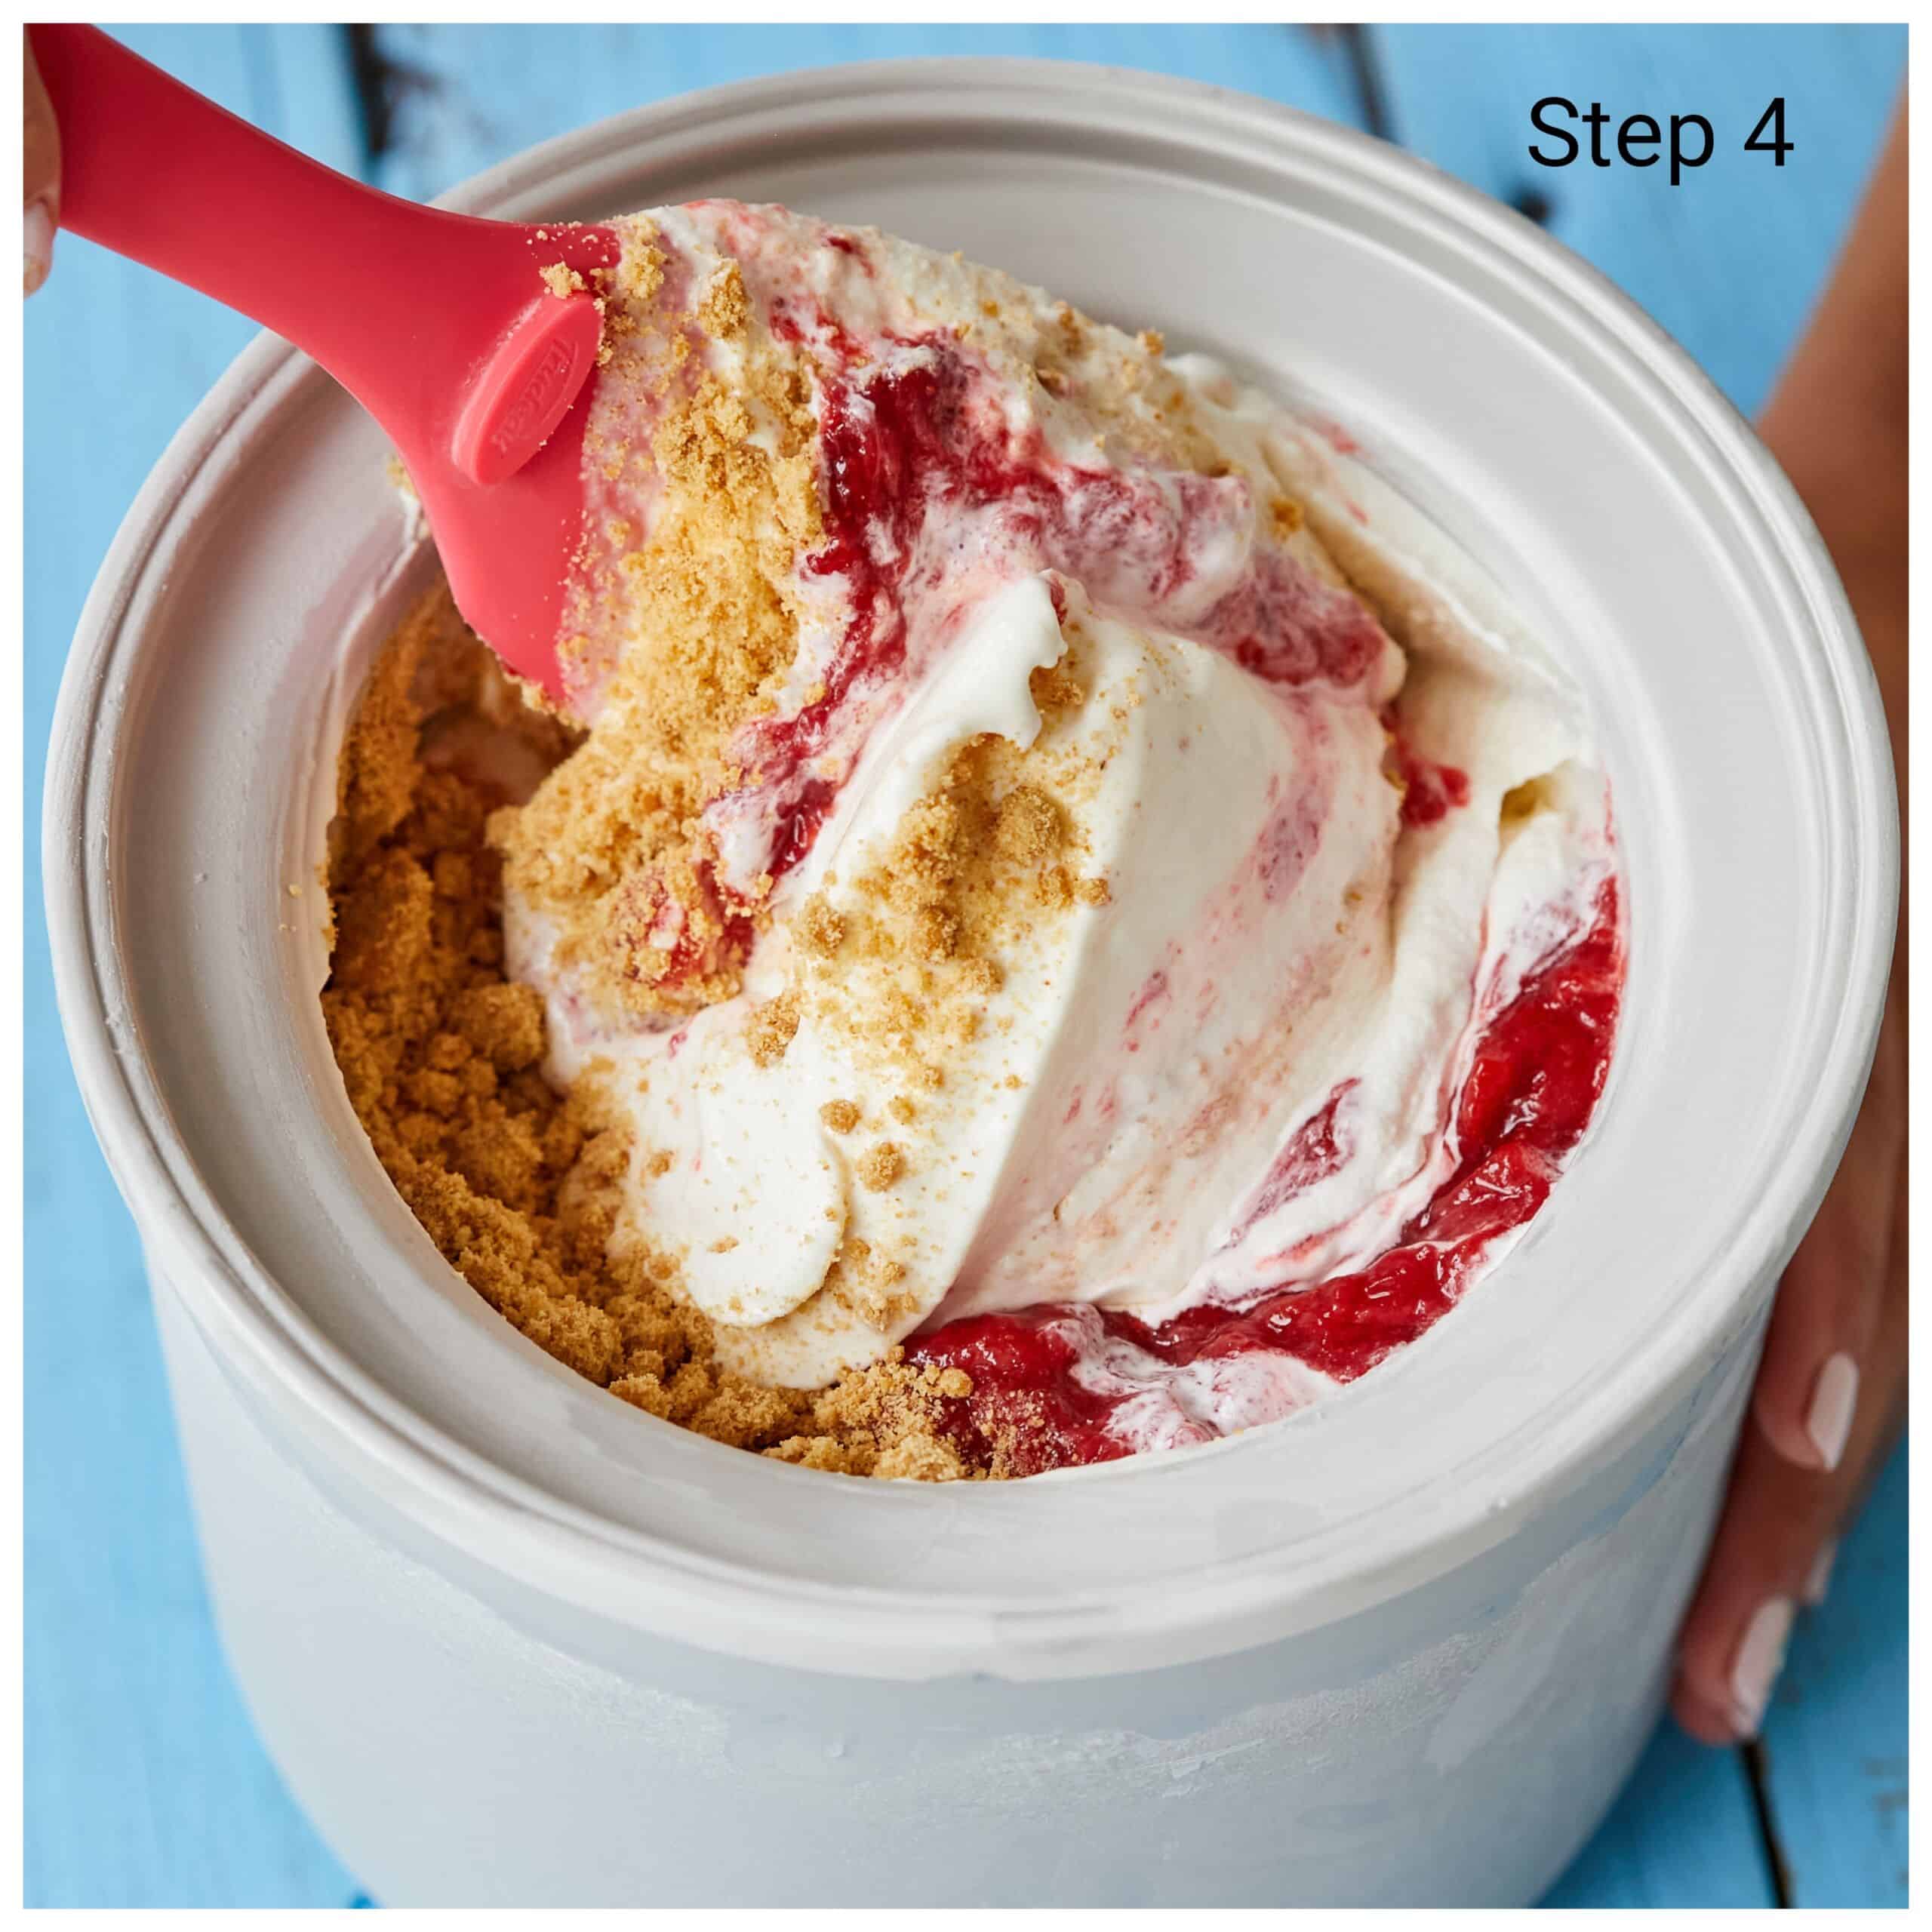 Step-by-step instructions on how to make Strawberry Cheesecake Ice Cream, step4: Gently fold in the strawberry mixture and Graham cracker crumbles.